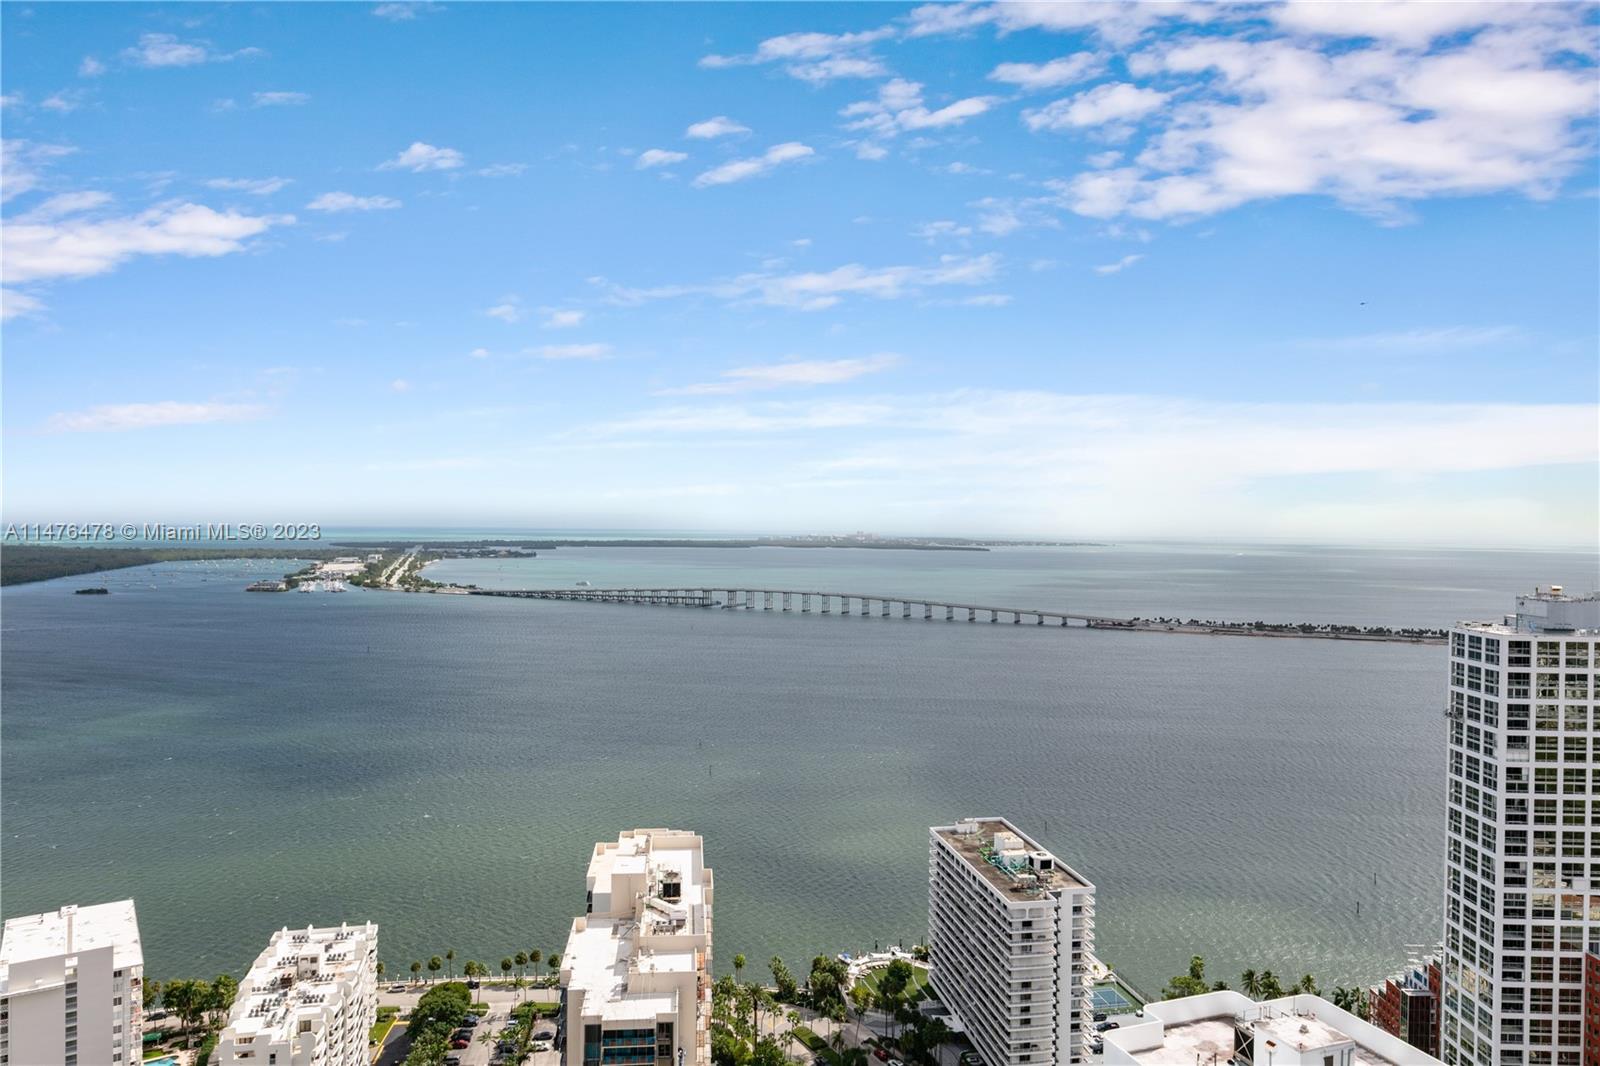 "Experience luxury living at Four Seasons Residence in Brickell, Miami, FL. This opulent 2-bedroom, 2-bathroom, 1,808 aprox. sq ft (by owner)condo offers stunning city and bay views. Enjoy the building's amenities, including three pools with cabanas, room service, concierge, and a 50,000 sq. ft. gym and spa at the Sports Club. The property also includes 1 parking space. Imagine residing high above, with breathtaking views of the Atlantic Ocean and Biscayne Bay. This home is ideal for both entertaining and daily living, featuring spacious rooms and a well-equipped kitchen. Welcome to your new home!

Additionally, unit 41B, with 2,348 aprox. sq ft, is also available for sale, providing the opportunity to combine both units for a total of 4,156 aprox. sq ft."